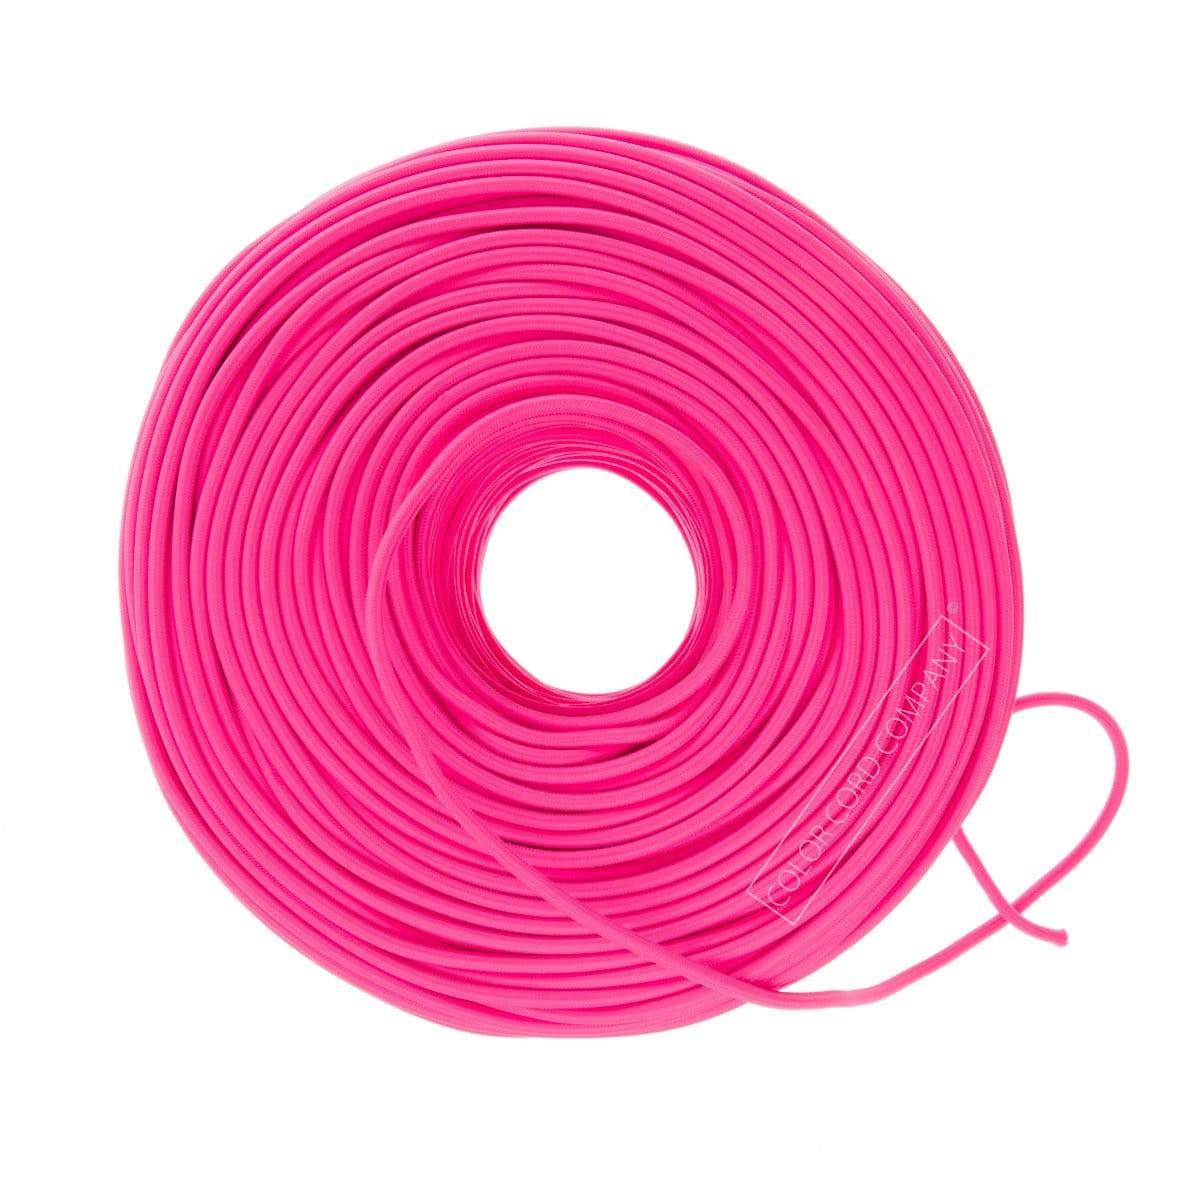 DIY Fabric Wire by the Foot - Neon Pink